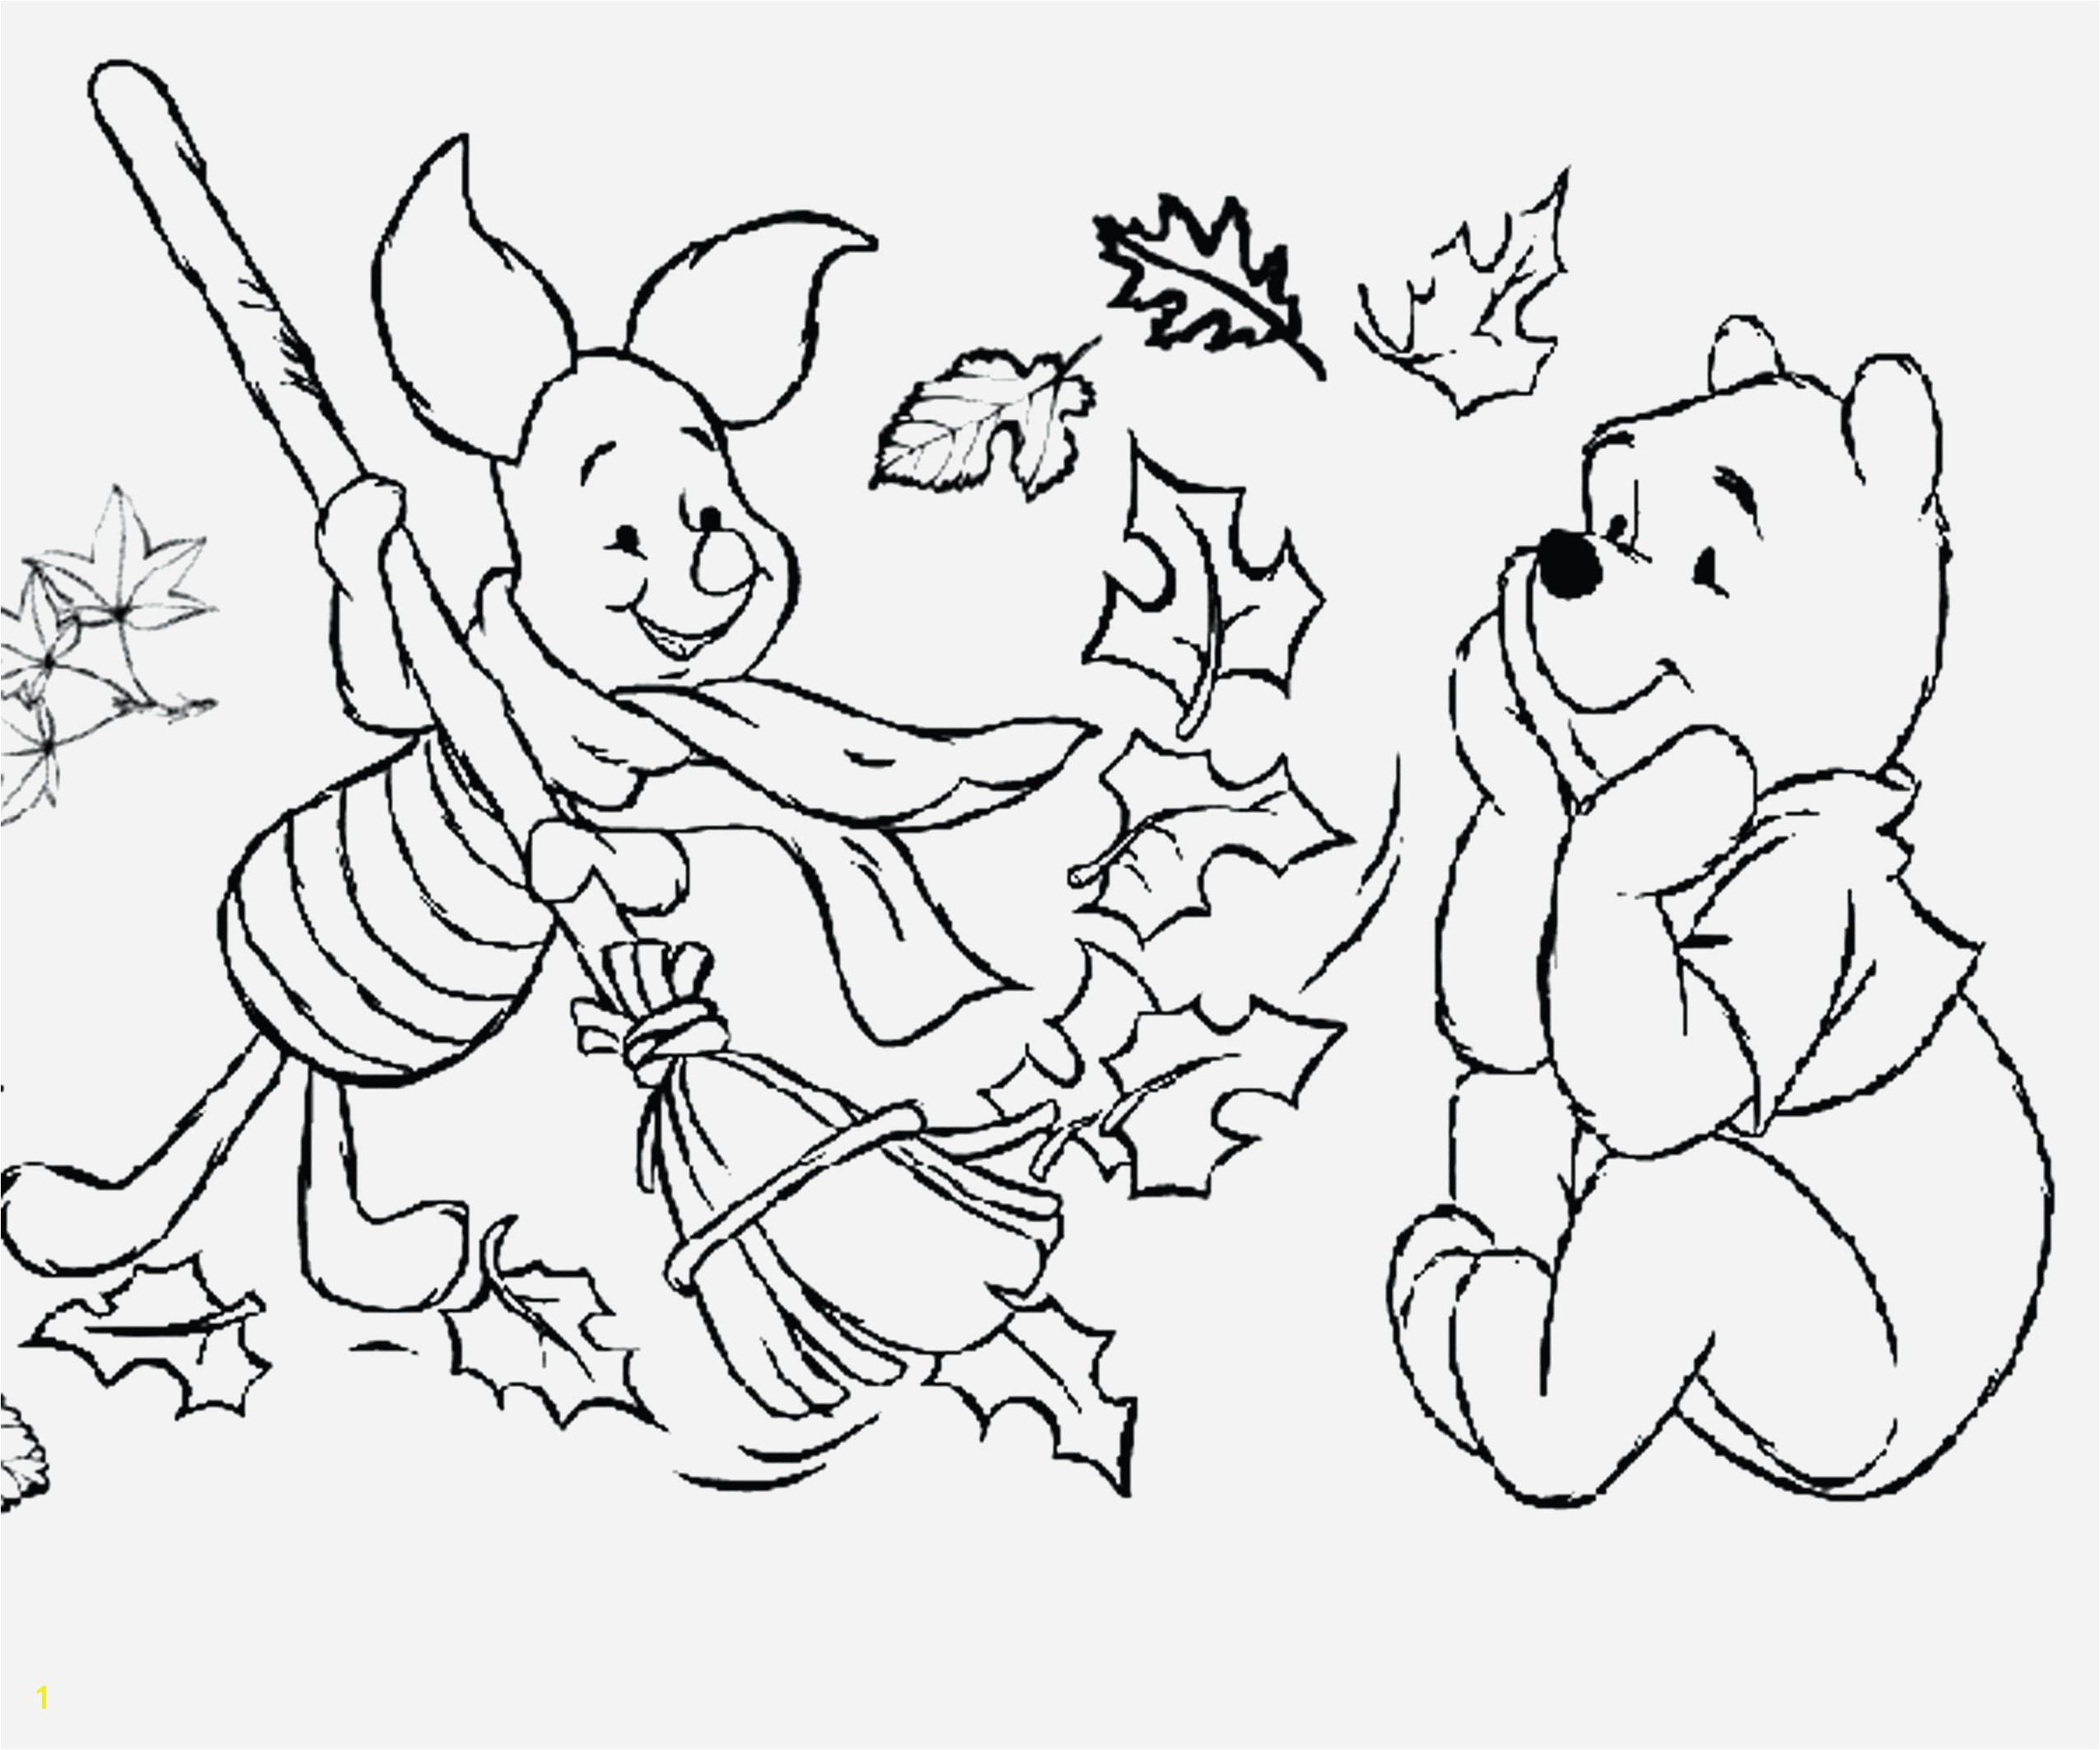 Printable Arctic Animal Coloring Pages Stunning Coloring Pages for Fall Printable with Free and 30aa 0d